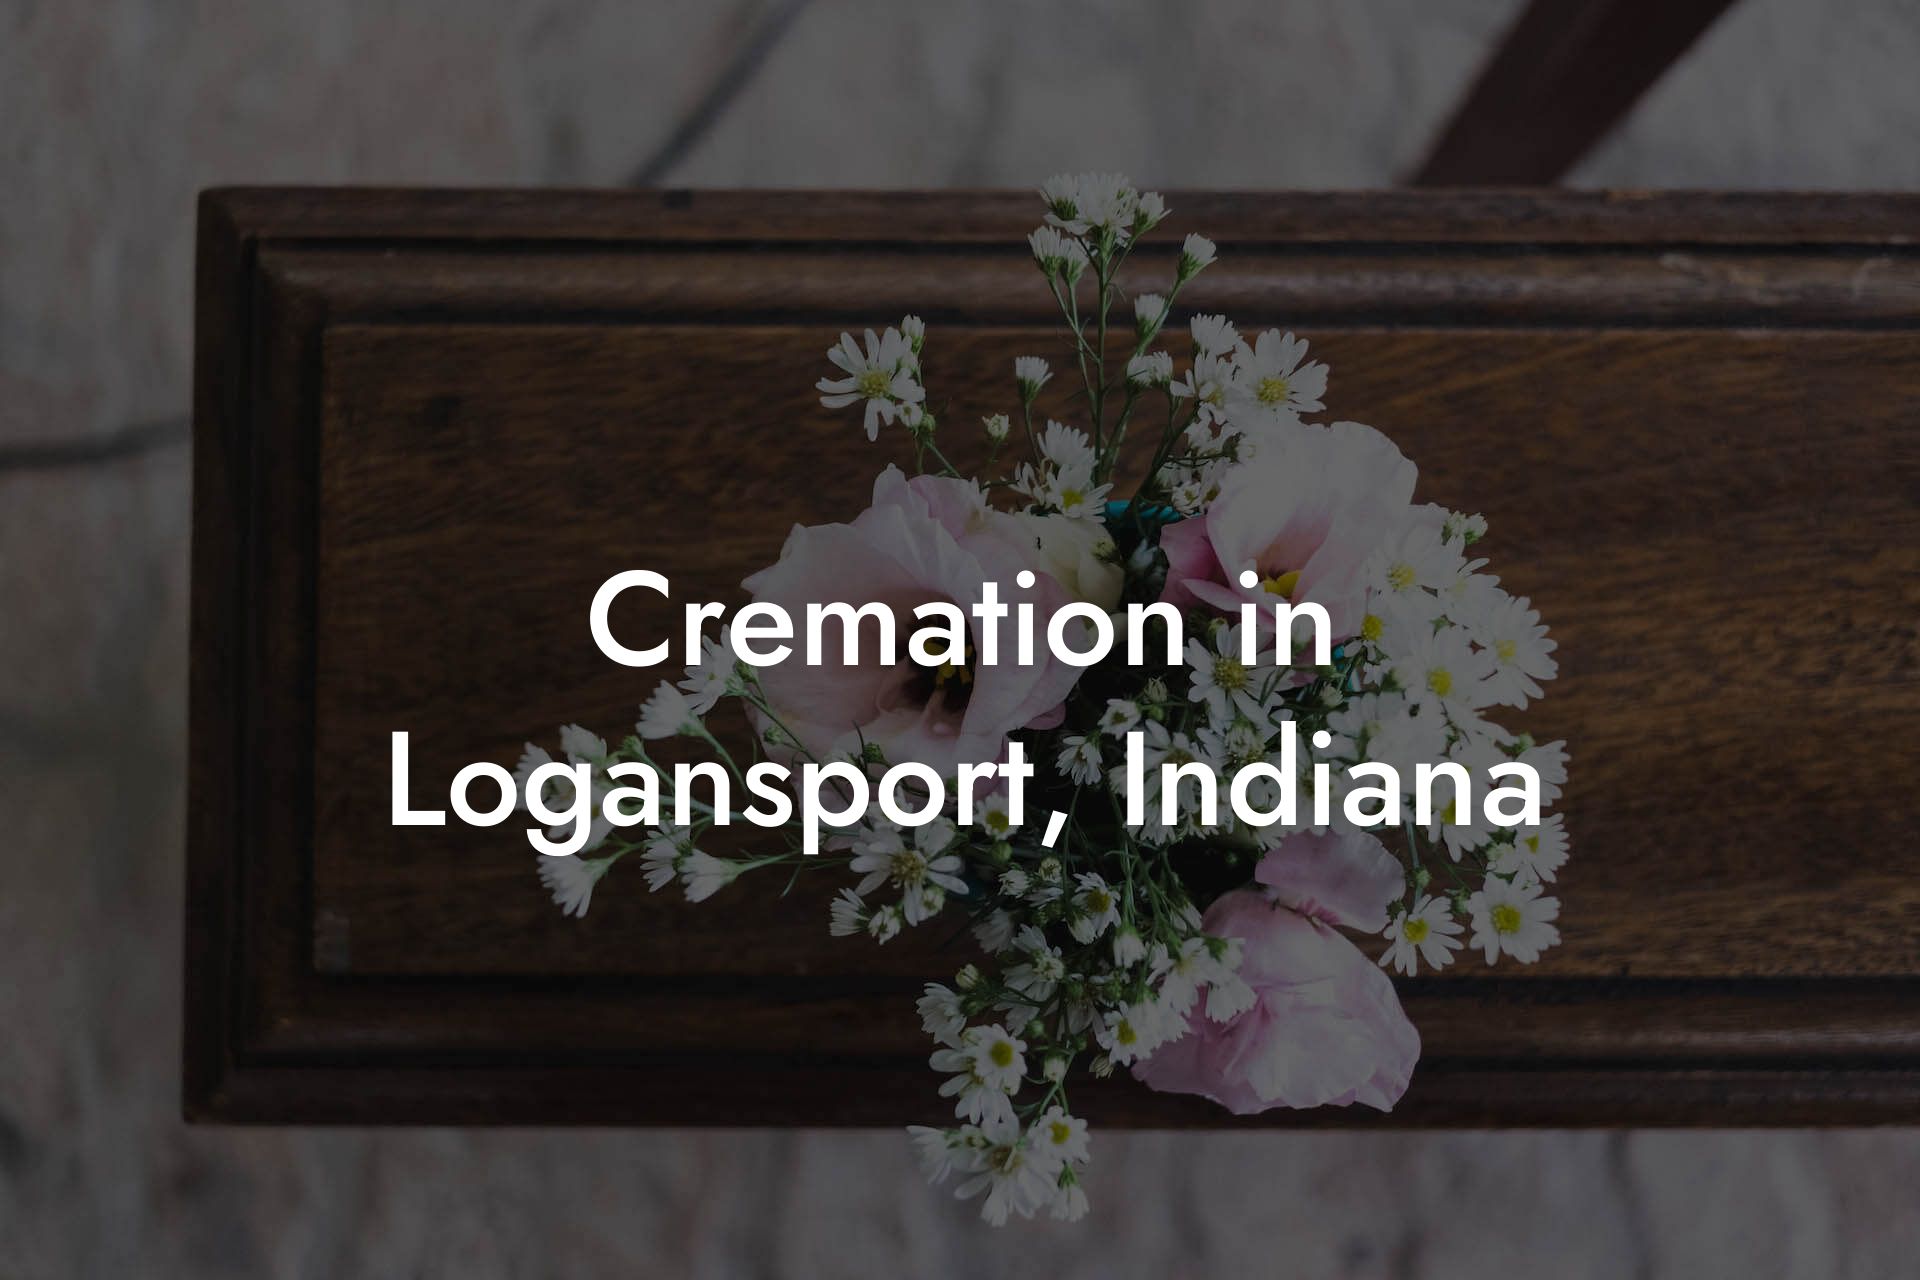 Cremation in Logansport, Indiana